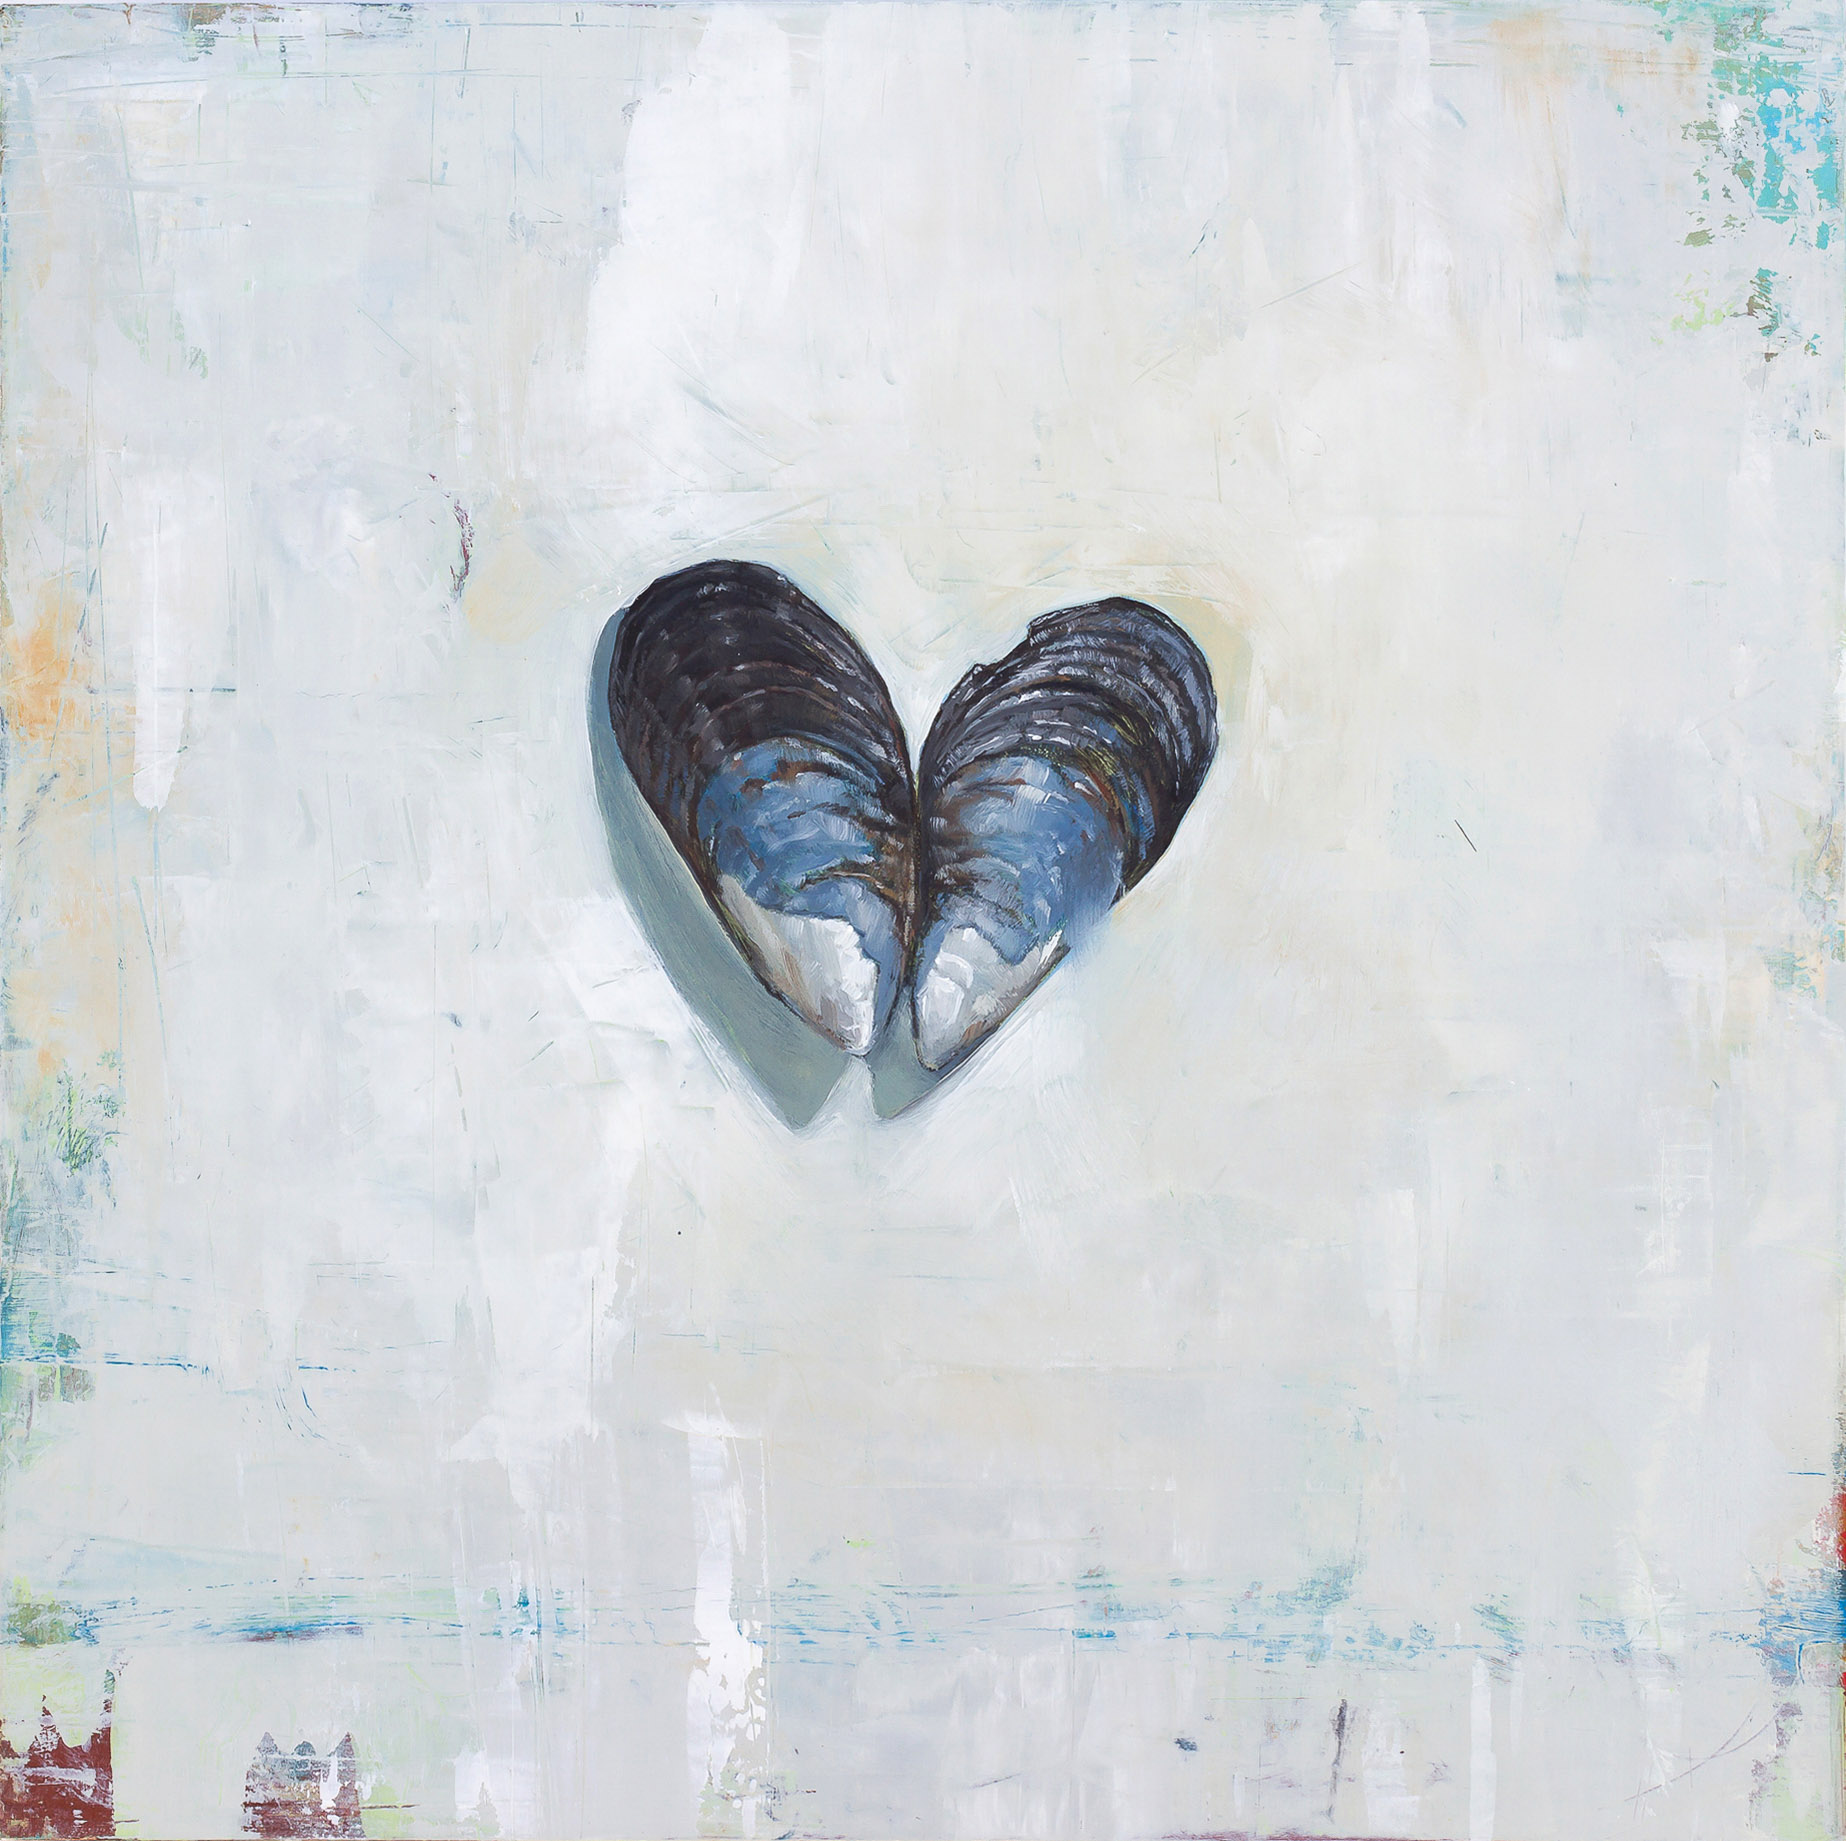   The Heart is a Mussel  2018 oil on panel 10 x 10 inches   Sold 